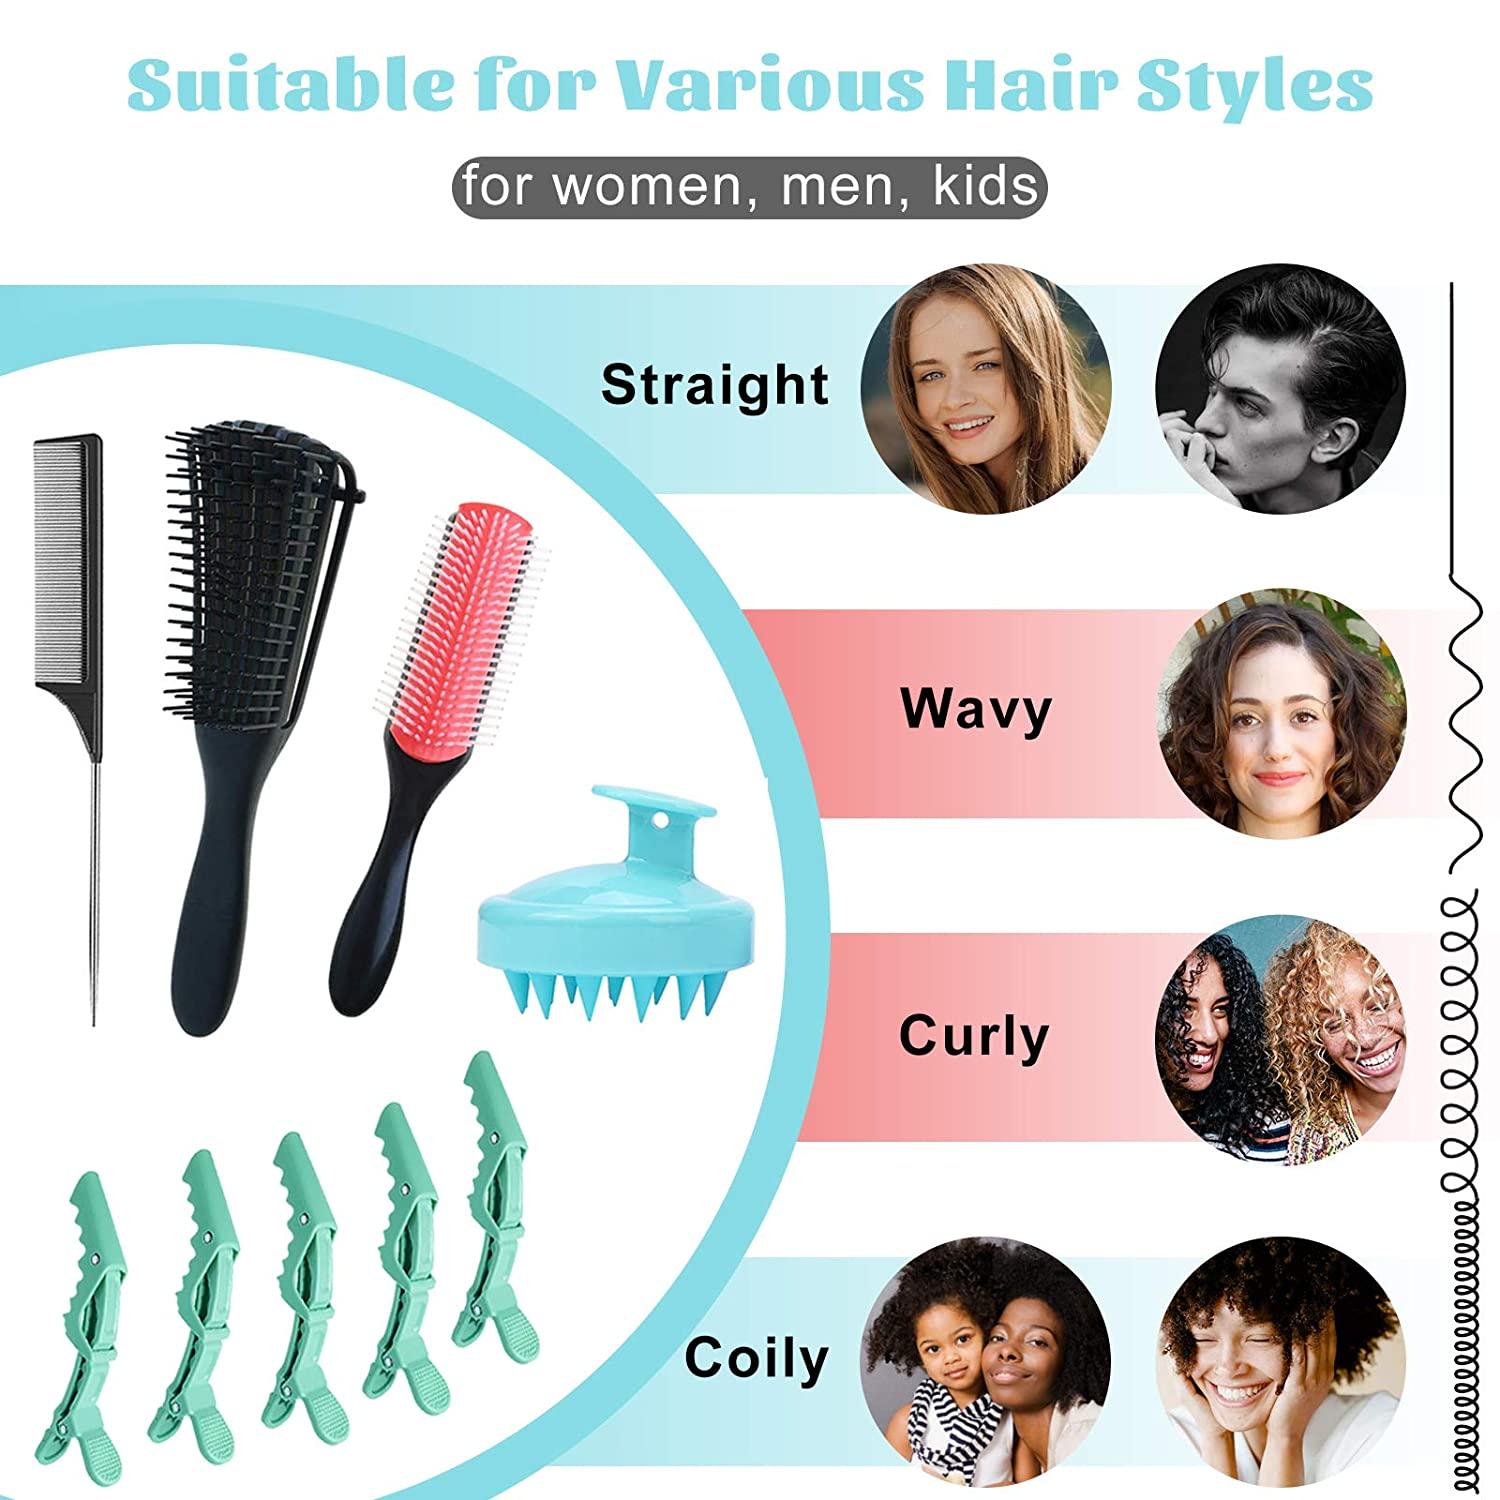 How To Find The Right Brush For Your Hair Type? Find Your Perfect Match  With Our